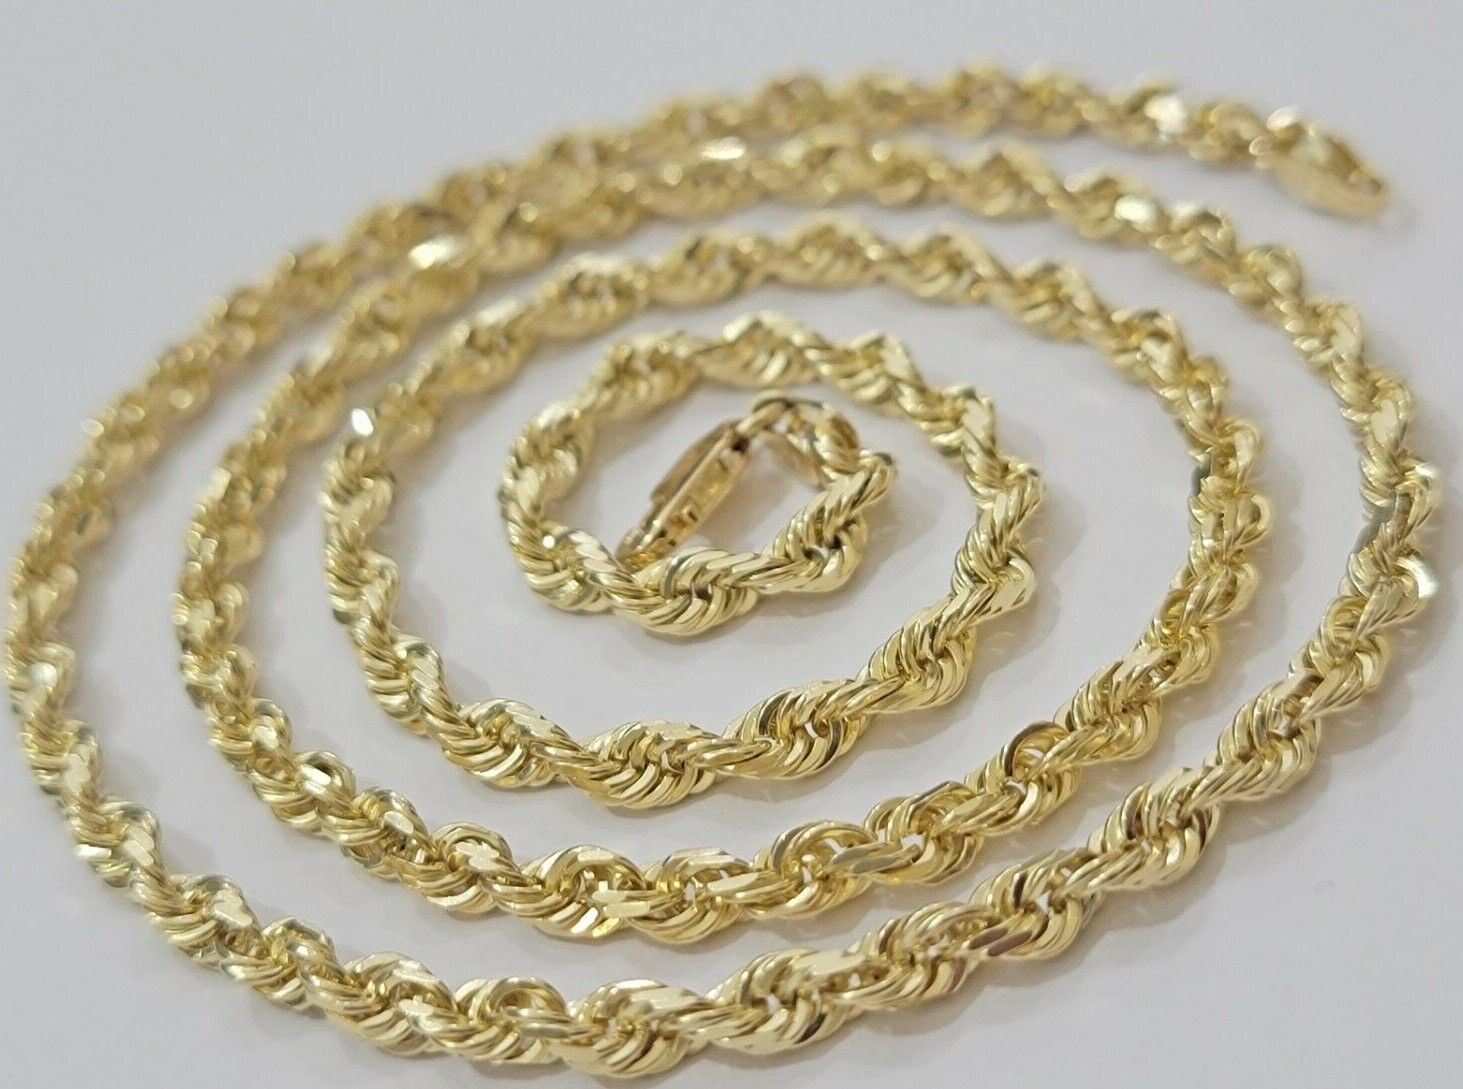 Real 10K Yellow Gold Rope Chain Necklace 18 inch - 28 inch Solid 4mm Mens Women 4 mm / 26 inch